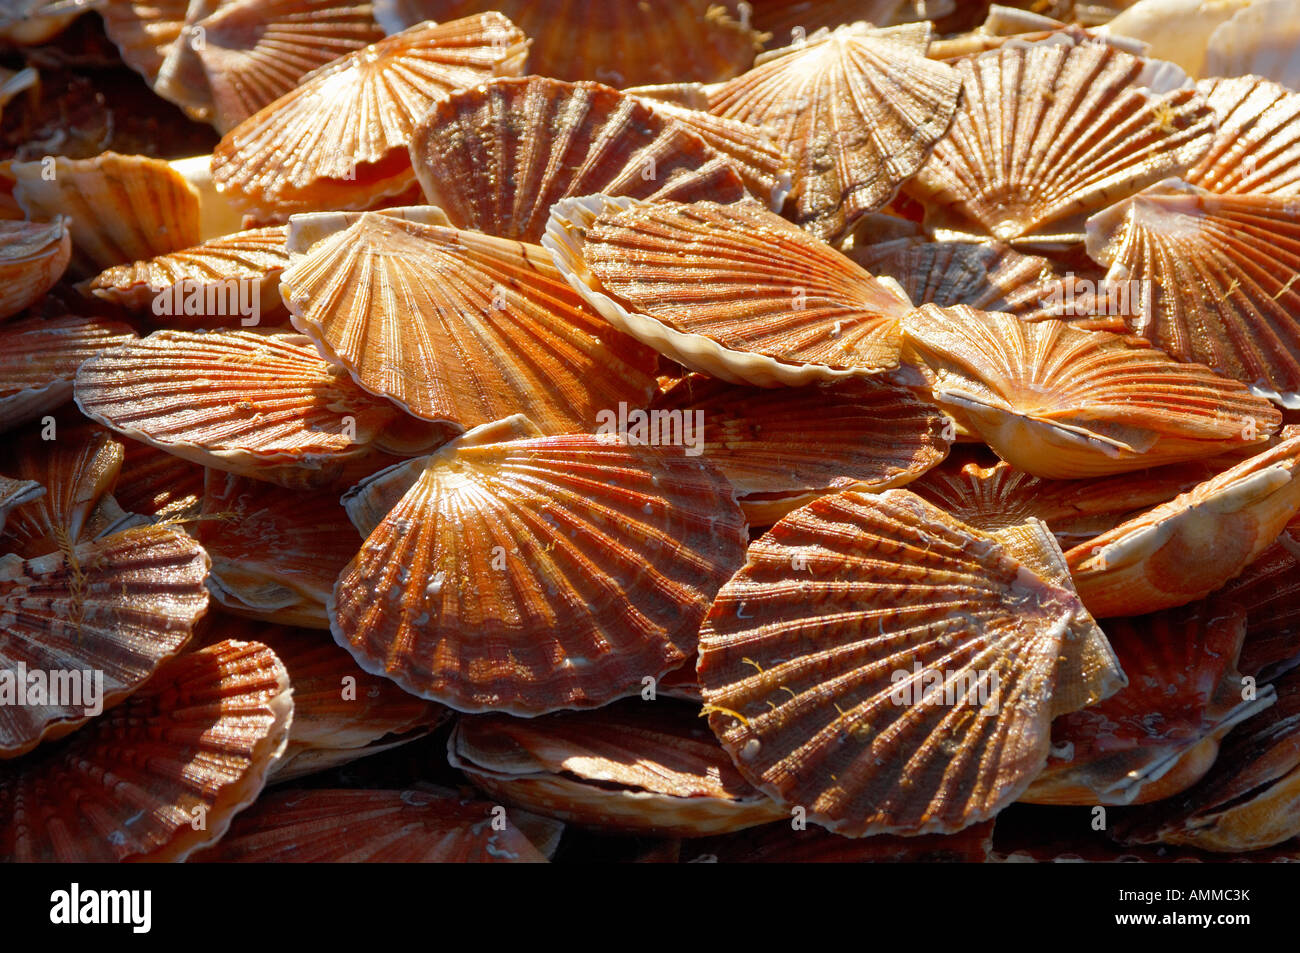 Scallops in shells being landed off a fishing boat Honfleur France Stock Photo